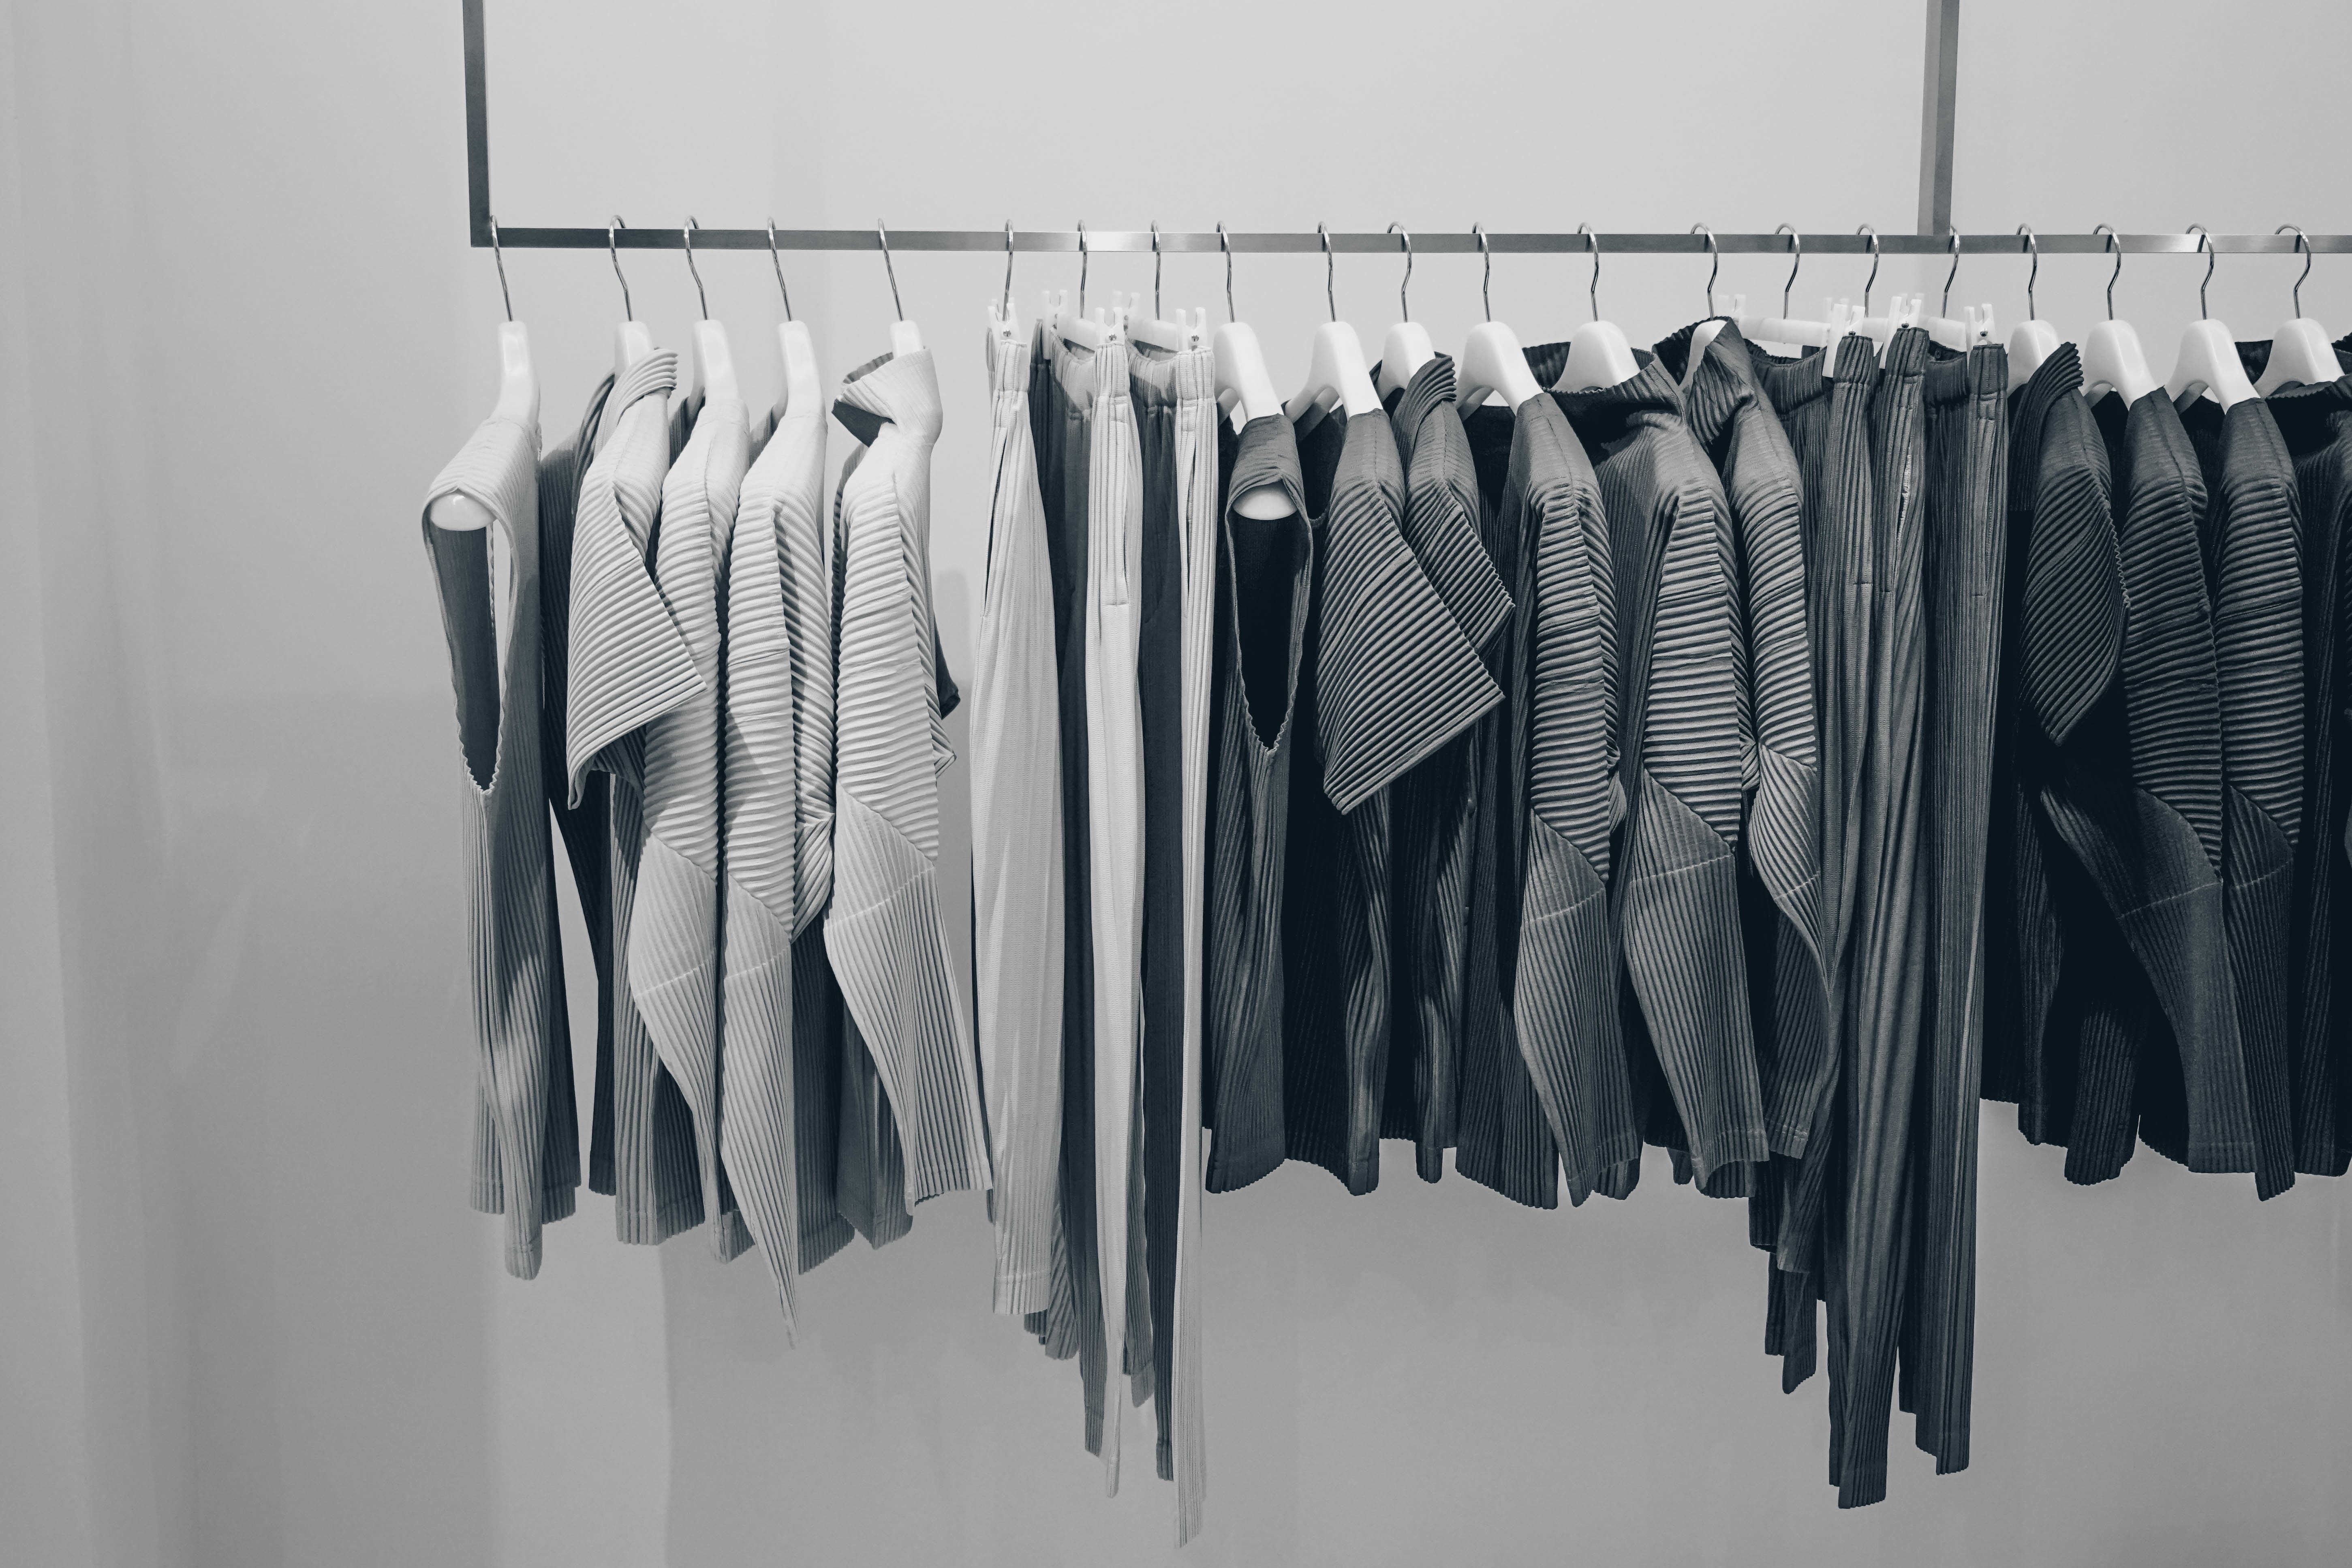 Gray And Black Hanging Clothes Lot Free Image